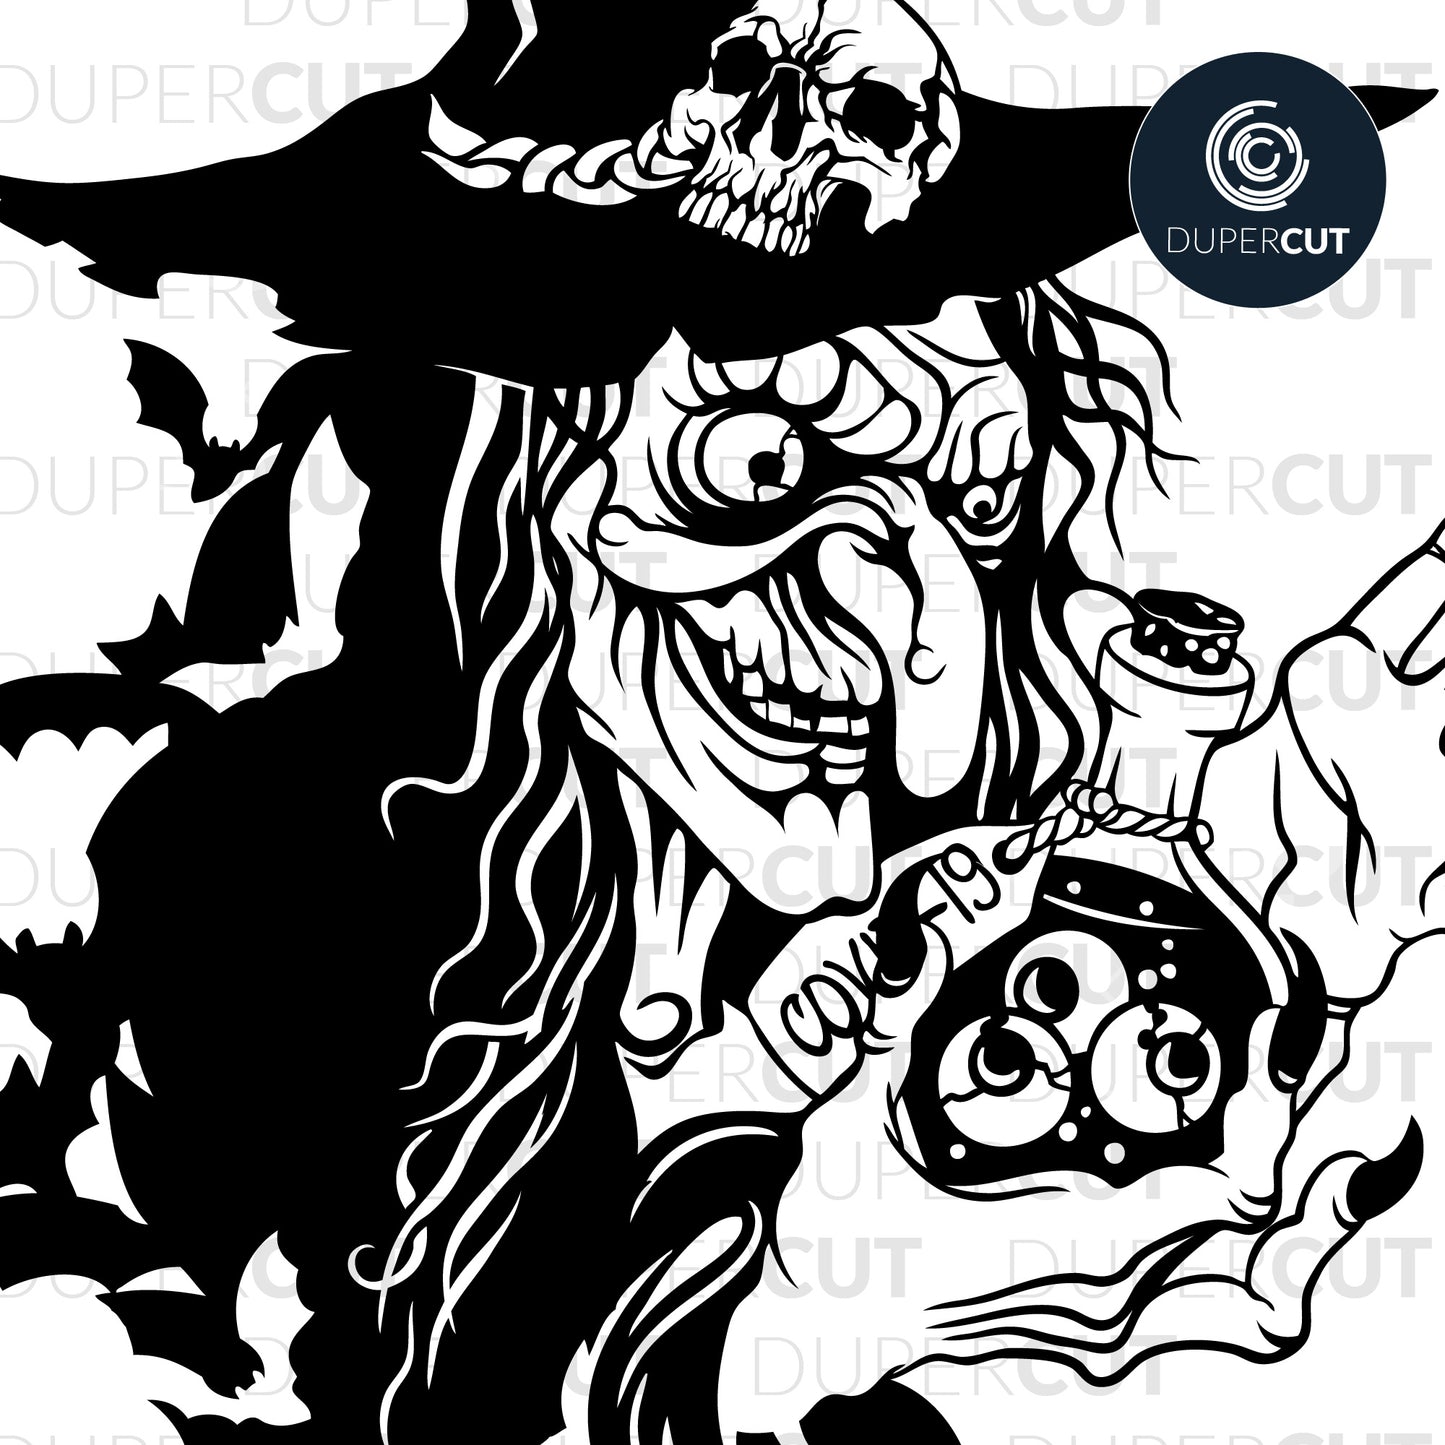 Halloween witch with skull and bats. SVG JPEG DXF files. Template for paper cutting, laser, print on demand. For use with Cricut, Glowforge, Silhouette Cameo, CNC machines. Personal or commercial license.